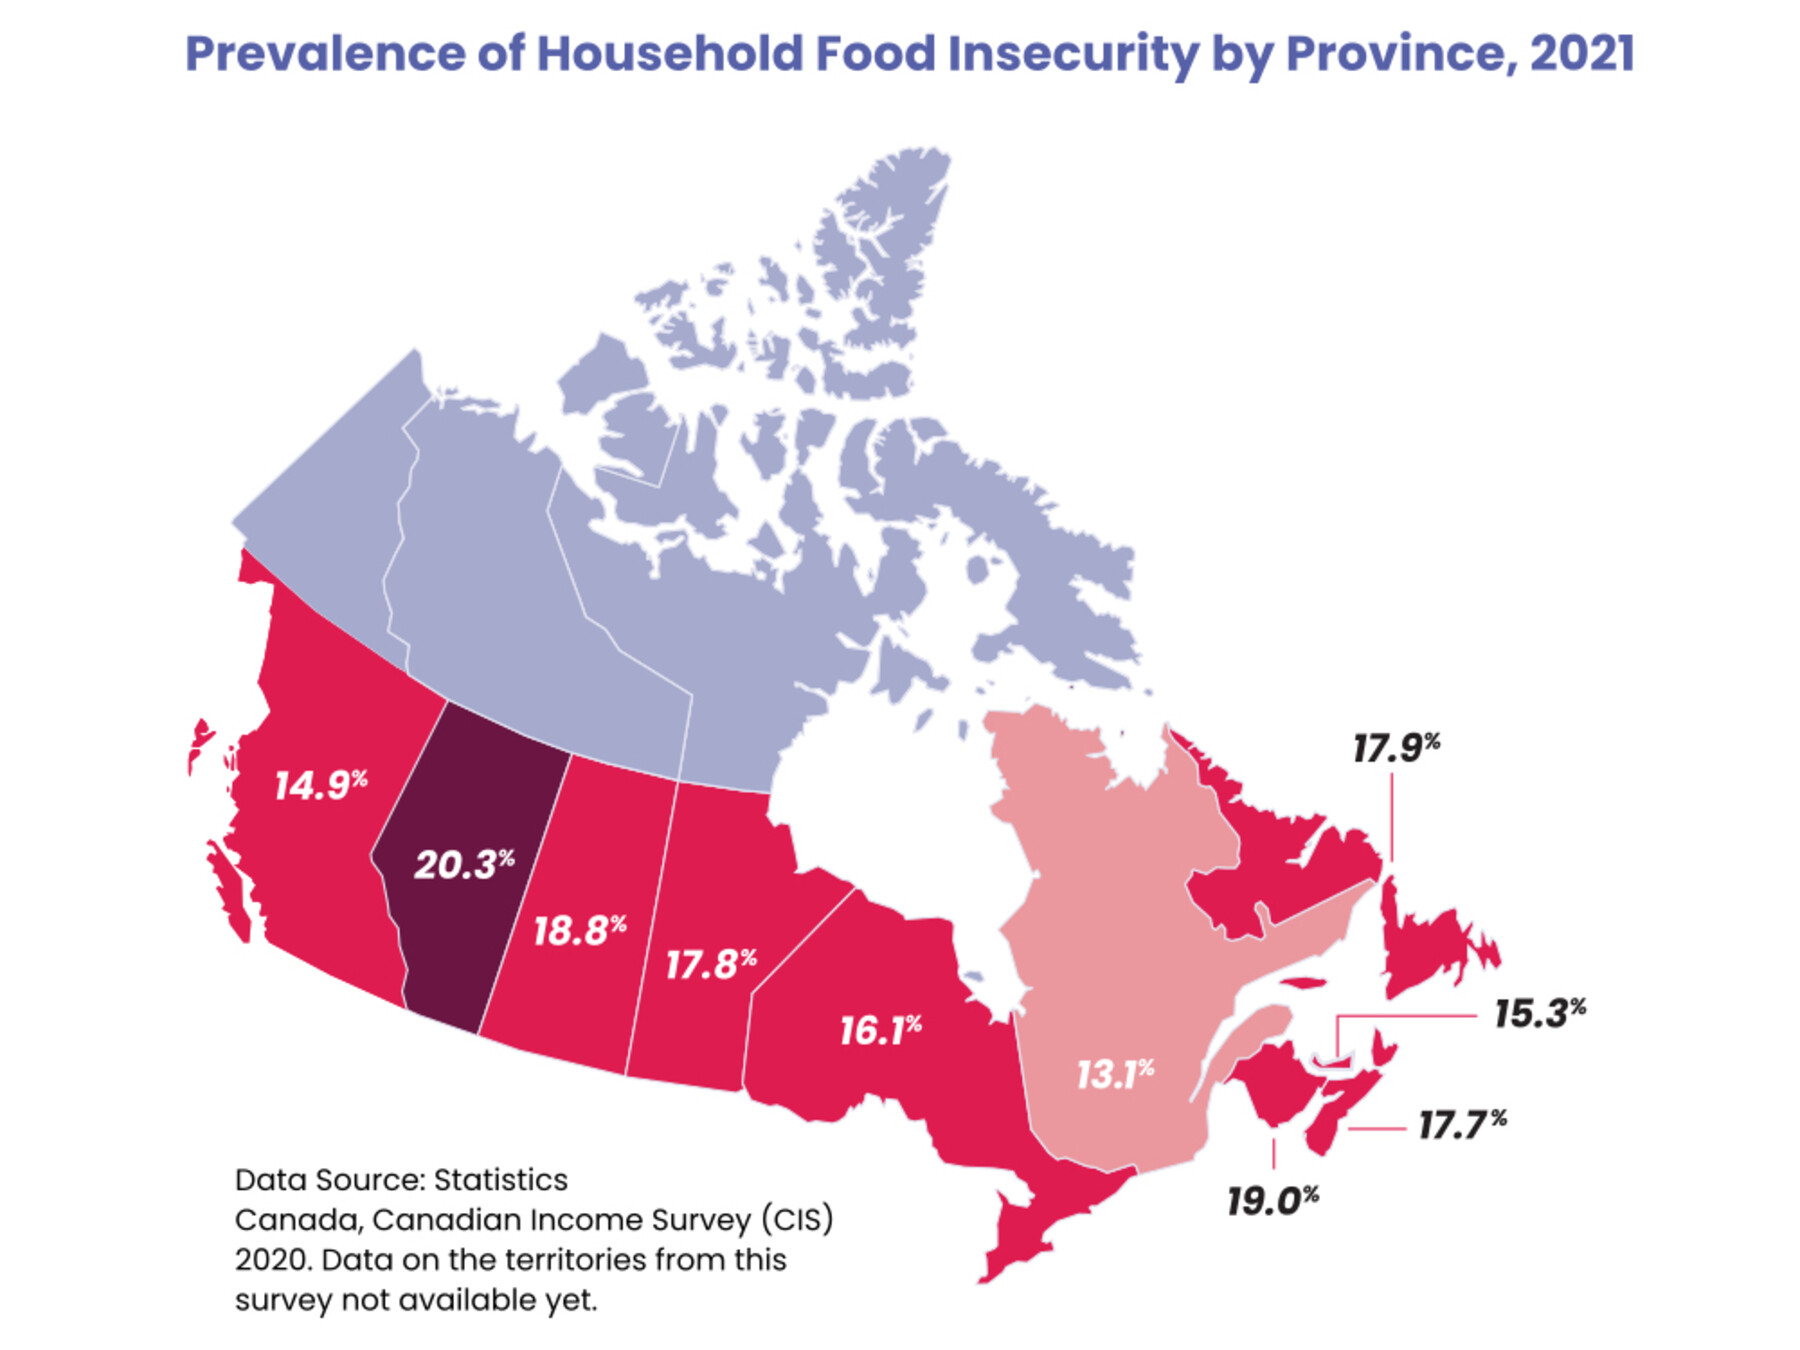 Map of household food insecurity in Canada by province